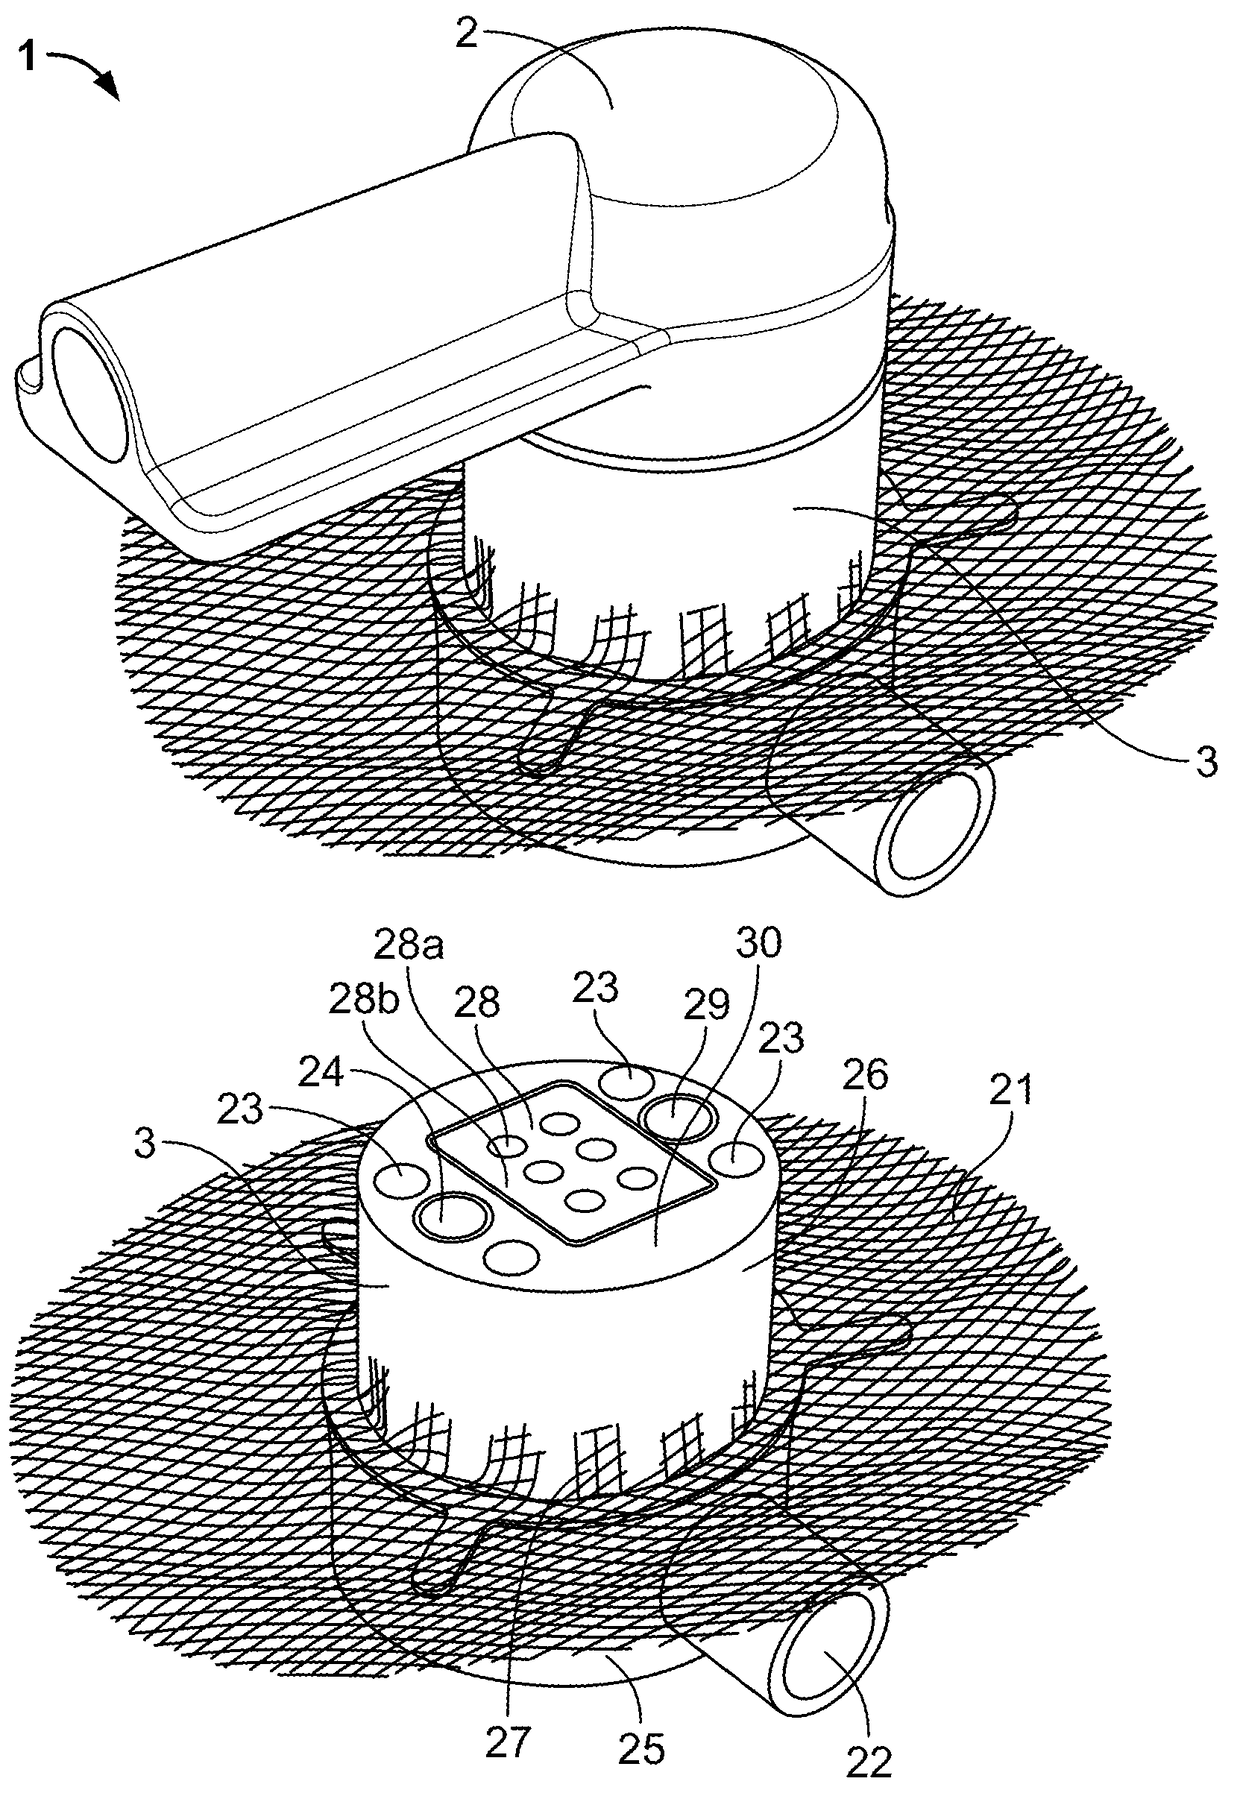 Percutaneous connector and associated methods of use